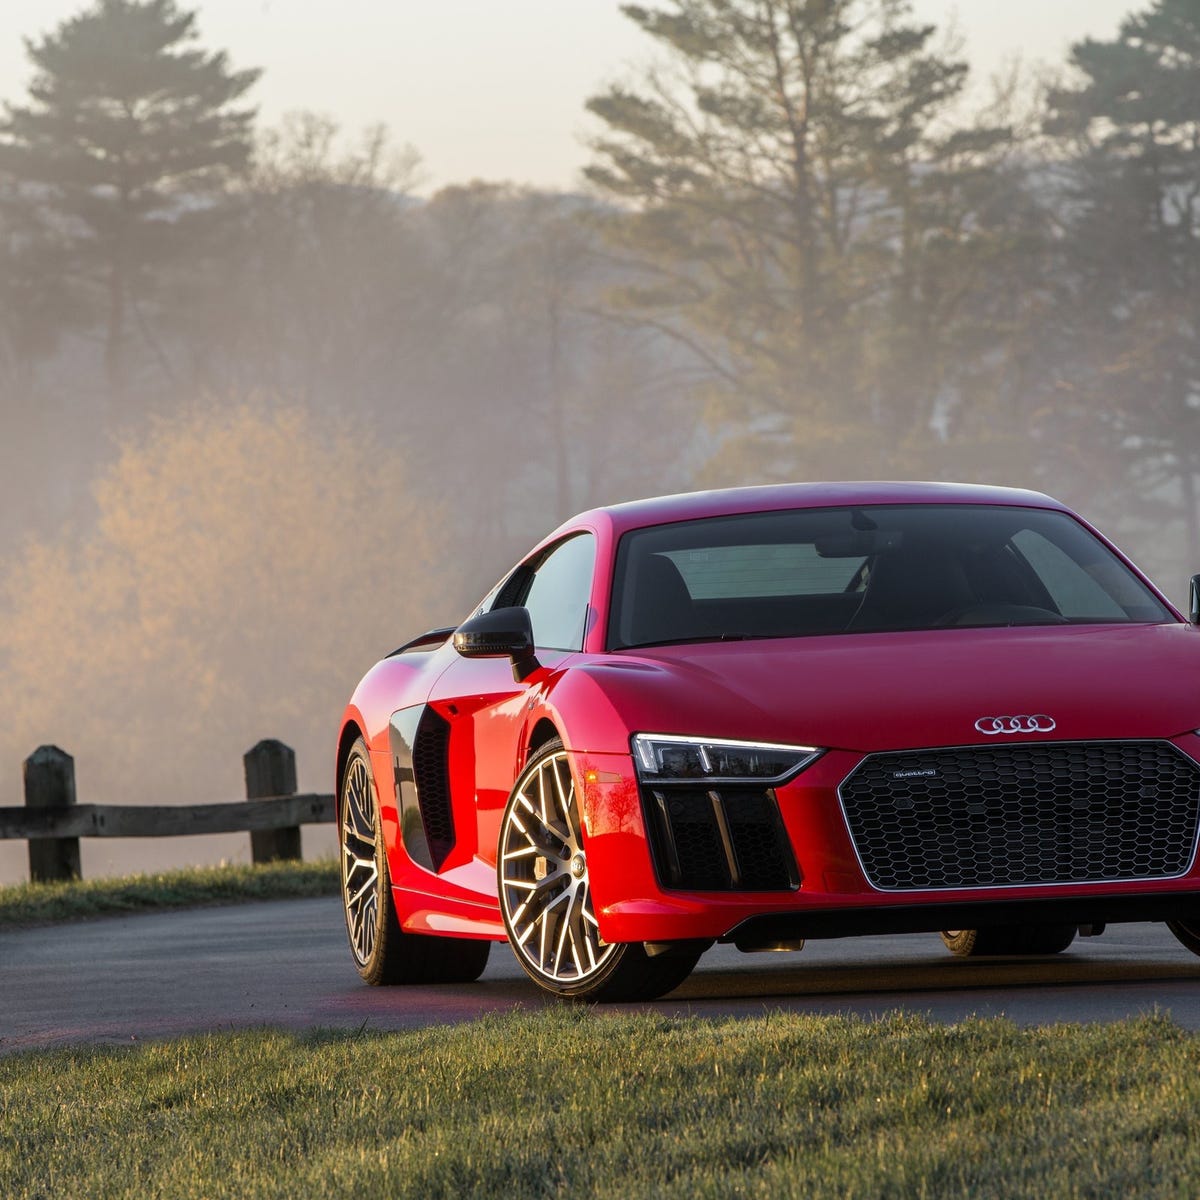 2017 Audi R8 V10 Plus review: The Audi R8 V10 Plus is 610 screaming horses  of mid-engine fury - CNET